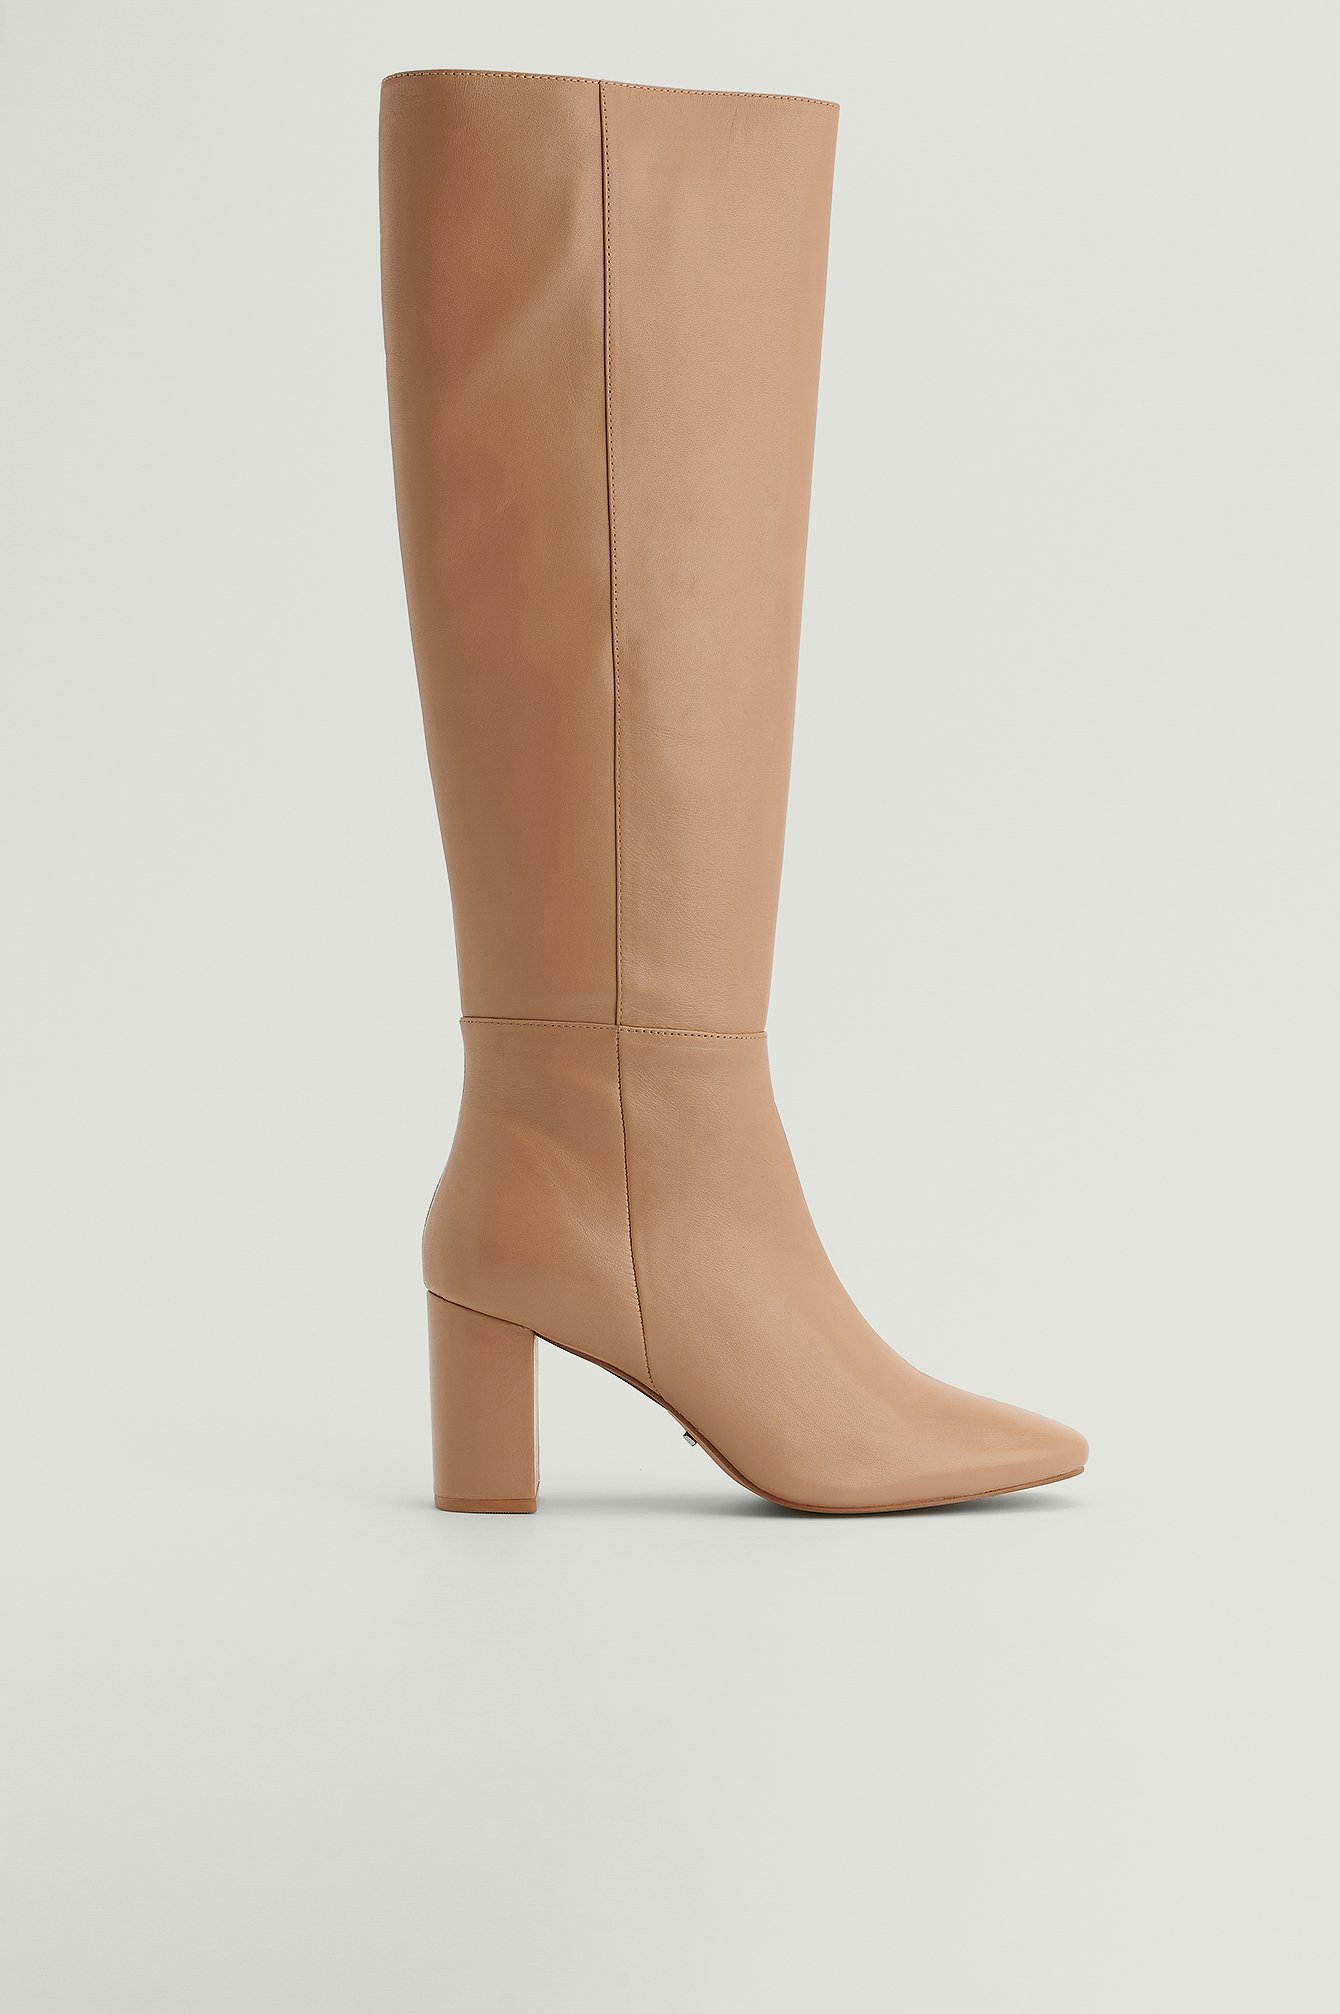 NA-KD Shoes Leather Knee High Boots - Beige